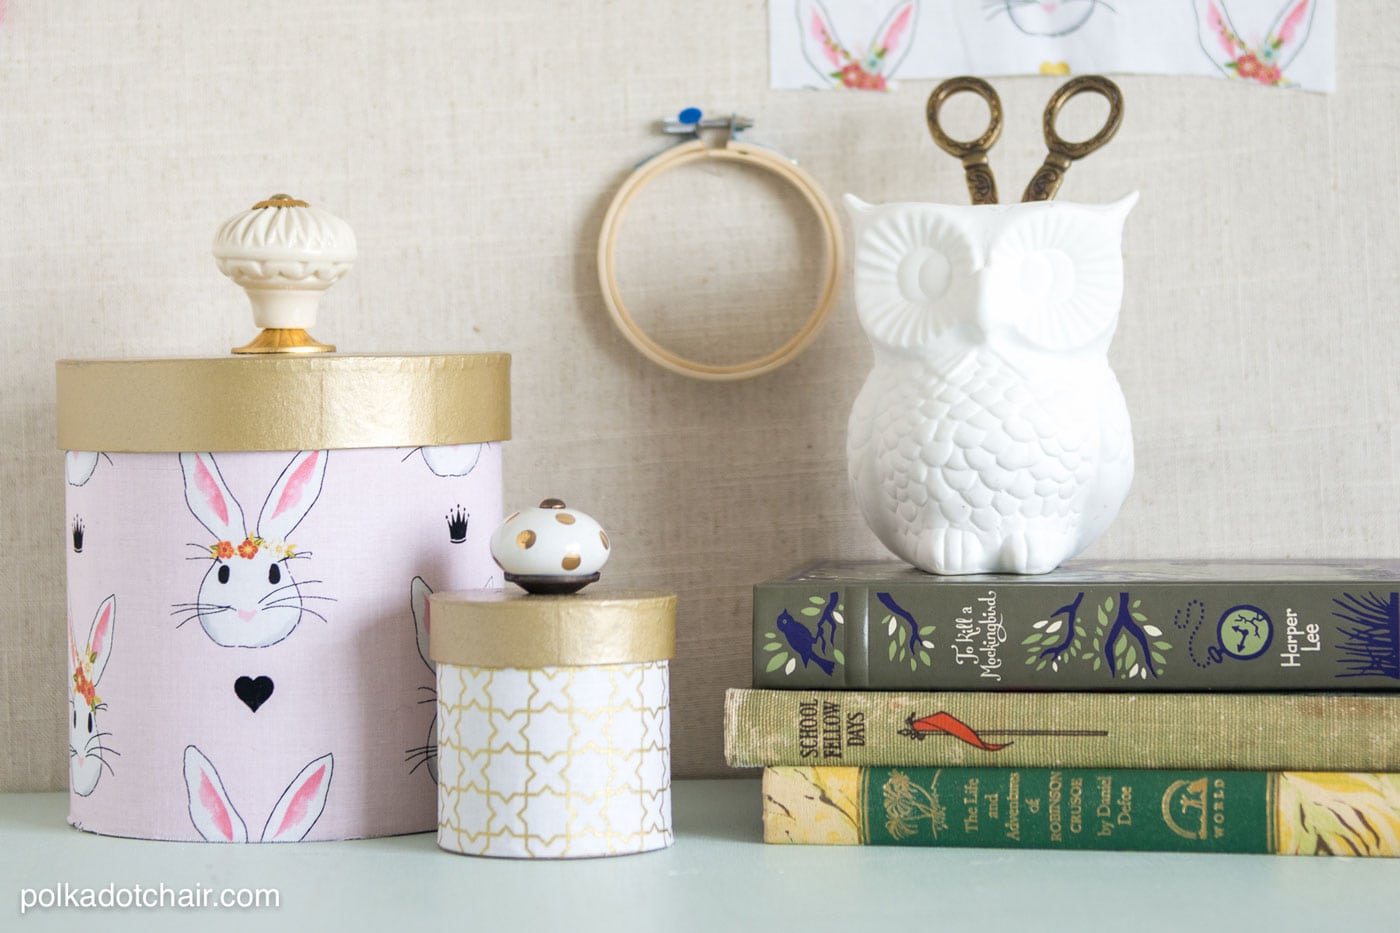 Learn how to cover paper mache boxes with fabric to make these cute DIY storage containers!